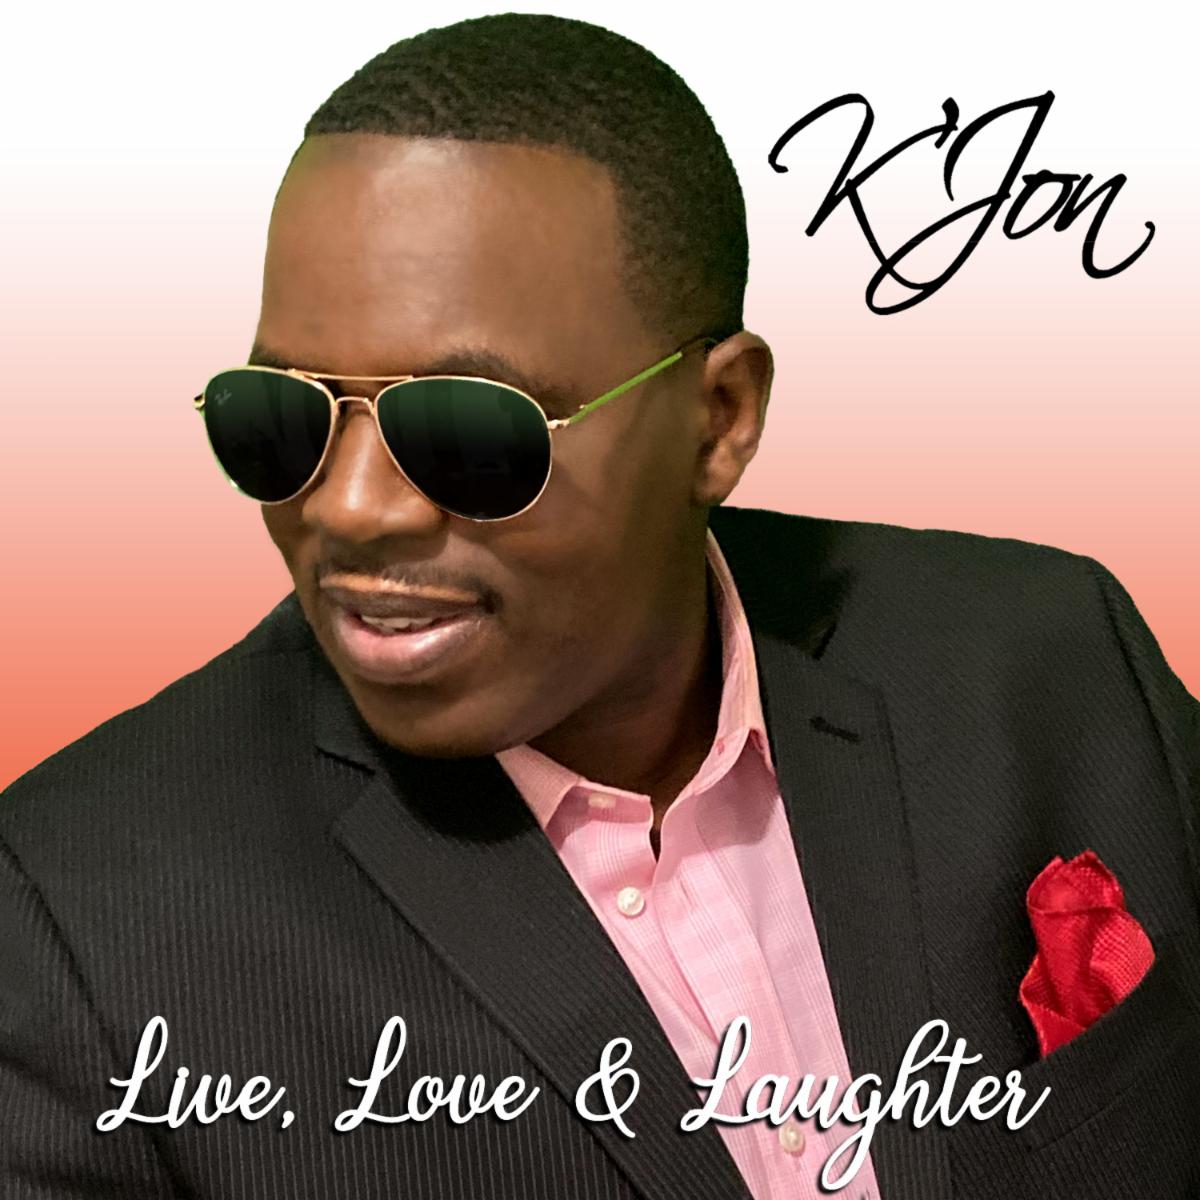 K'Jon Returns With the New Single "Live, Love & Laughter"